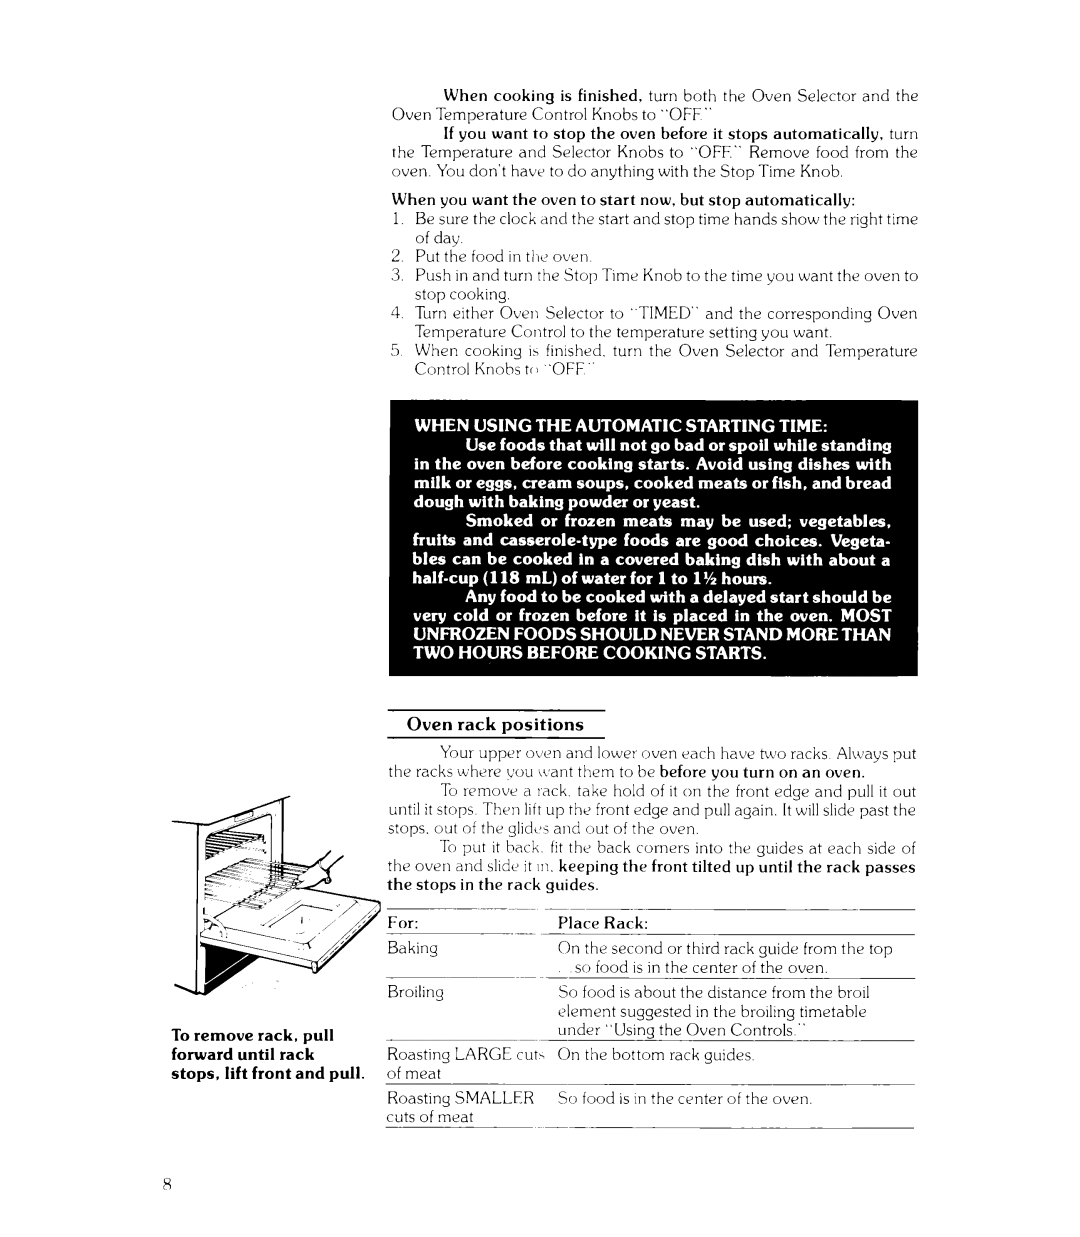 Whirlpool RJE-953PP manual Put the food in the oven 